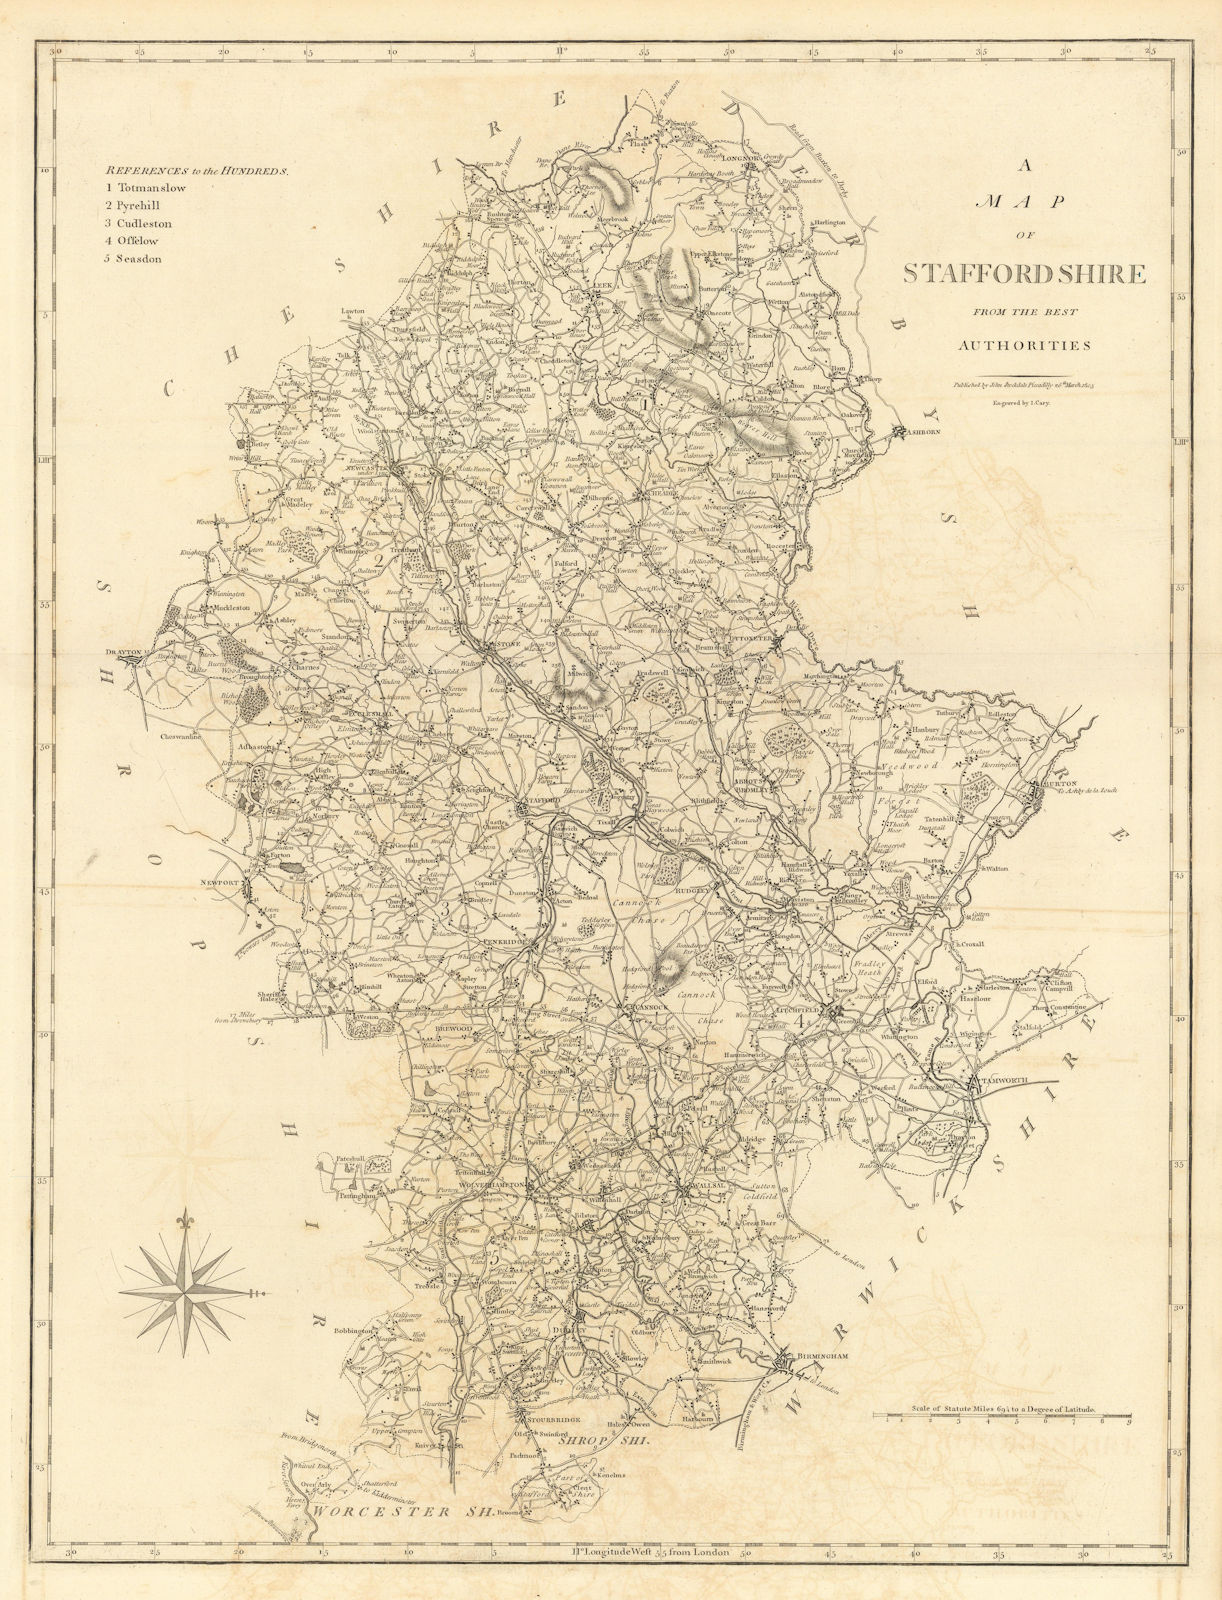 "A map of Staffordshire from the best authorities". County map. CARY 1806